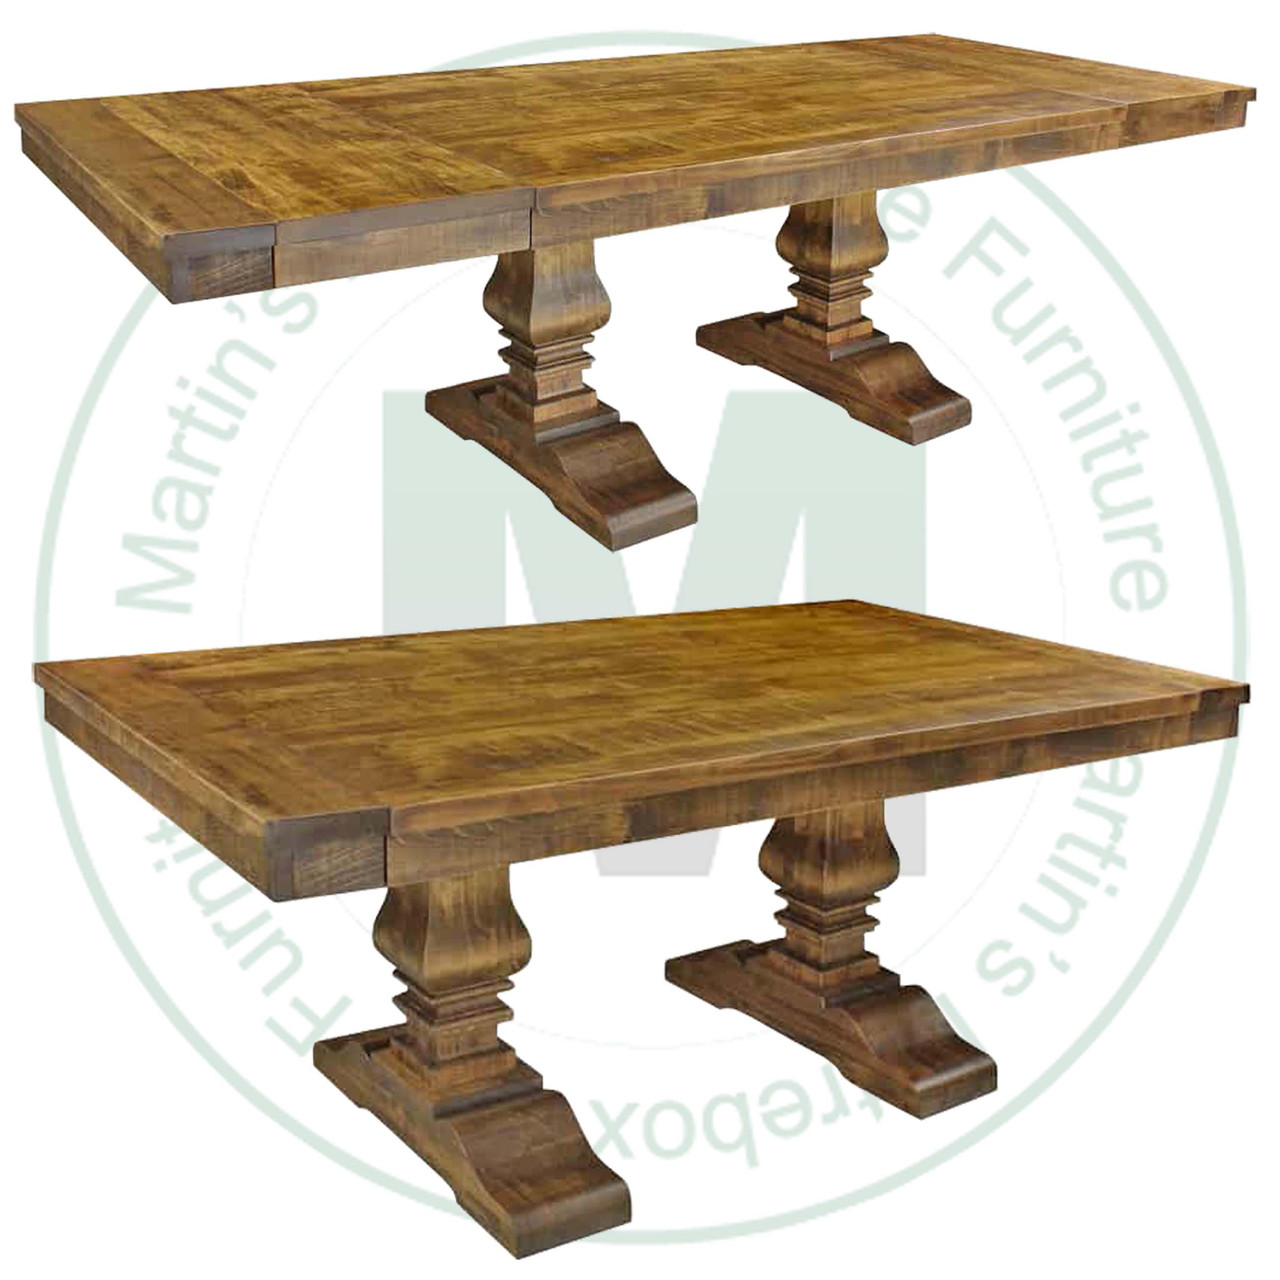 Oak Century Solid Top Double Pedestal Table 42''D x 72''W x 30''H With 2 - 16'' Leaves